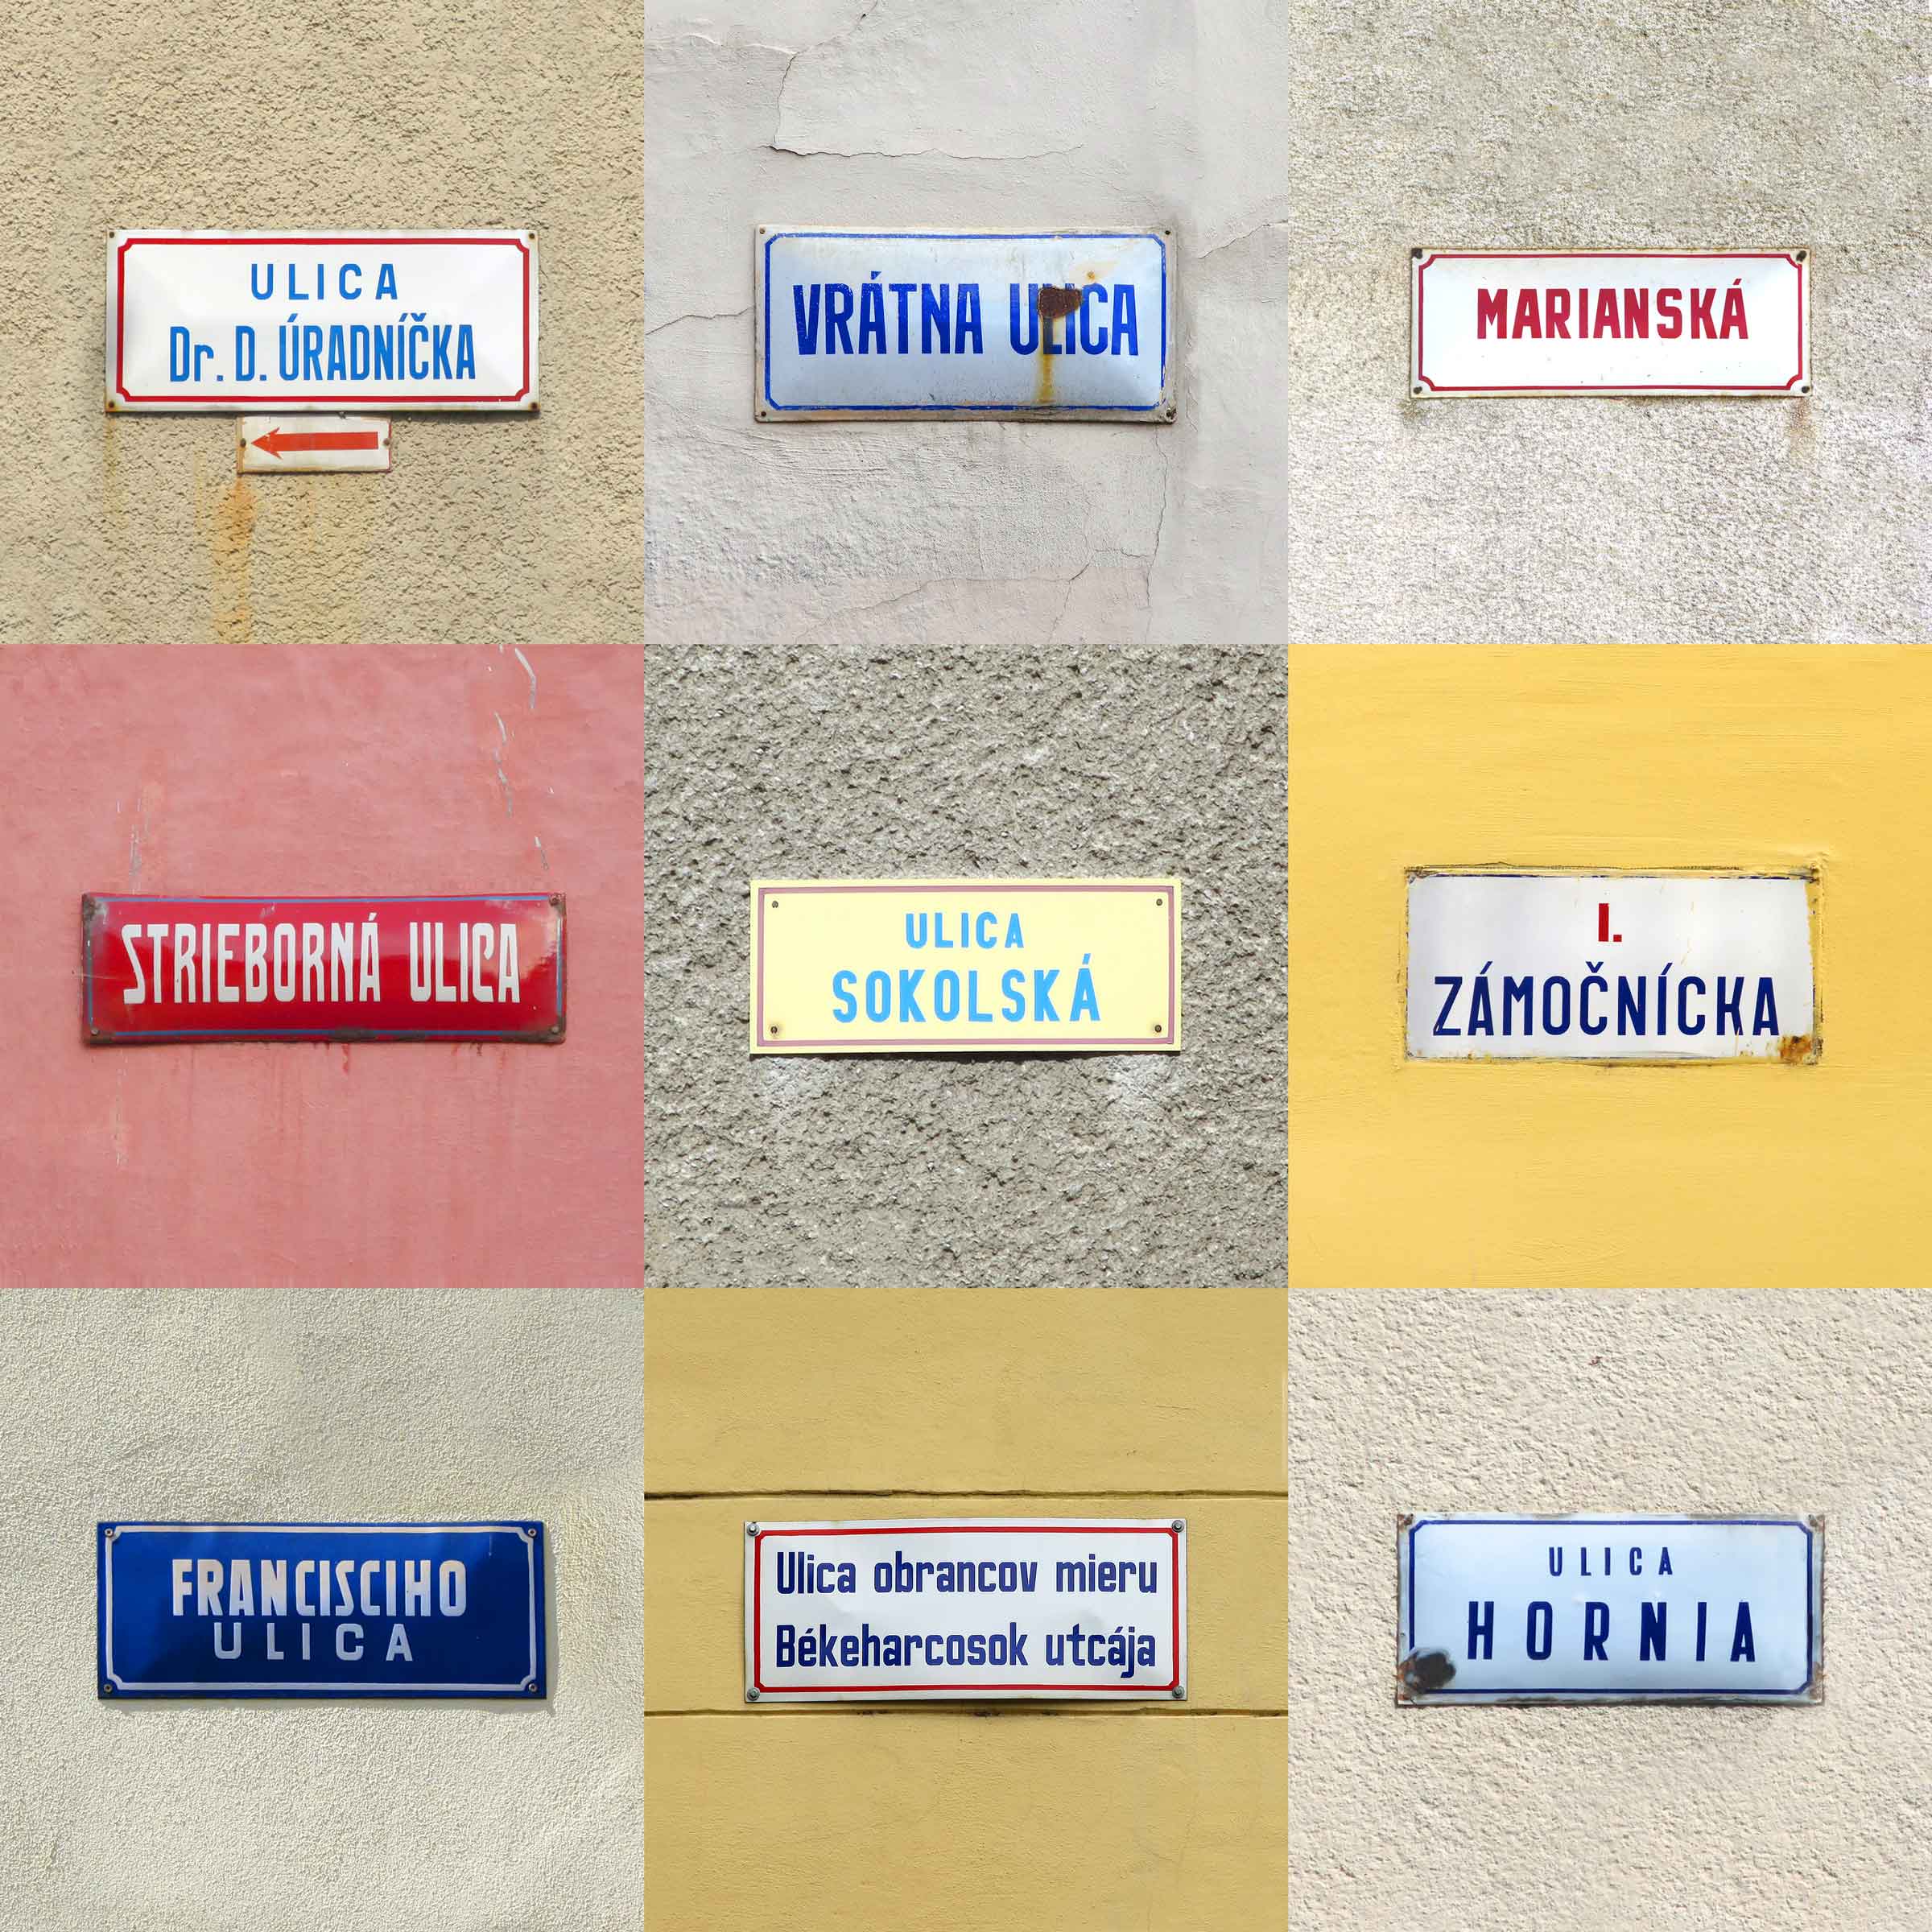 The condition of a uniform design within a municipality hasn’t always been met – plates ignoring the standard (top left) can be found in many cities across Slovakia.